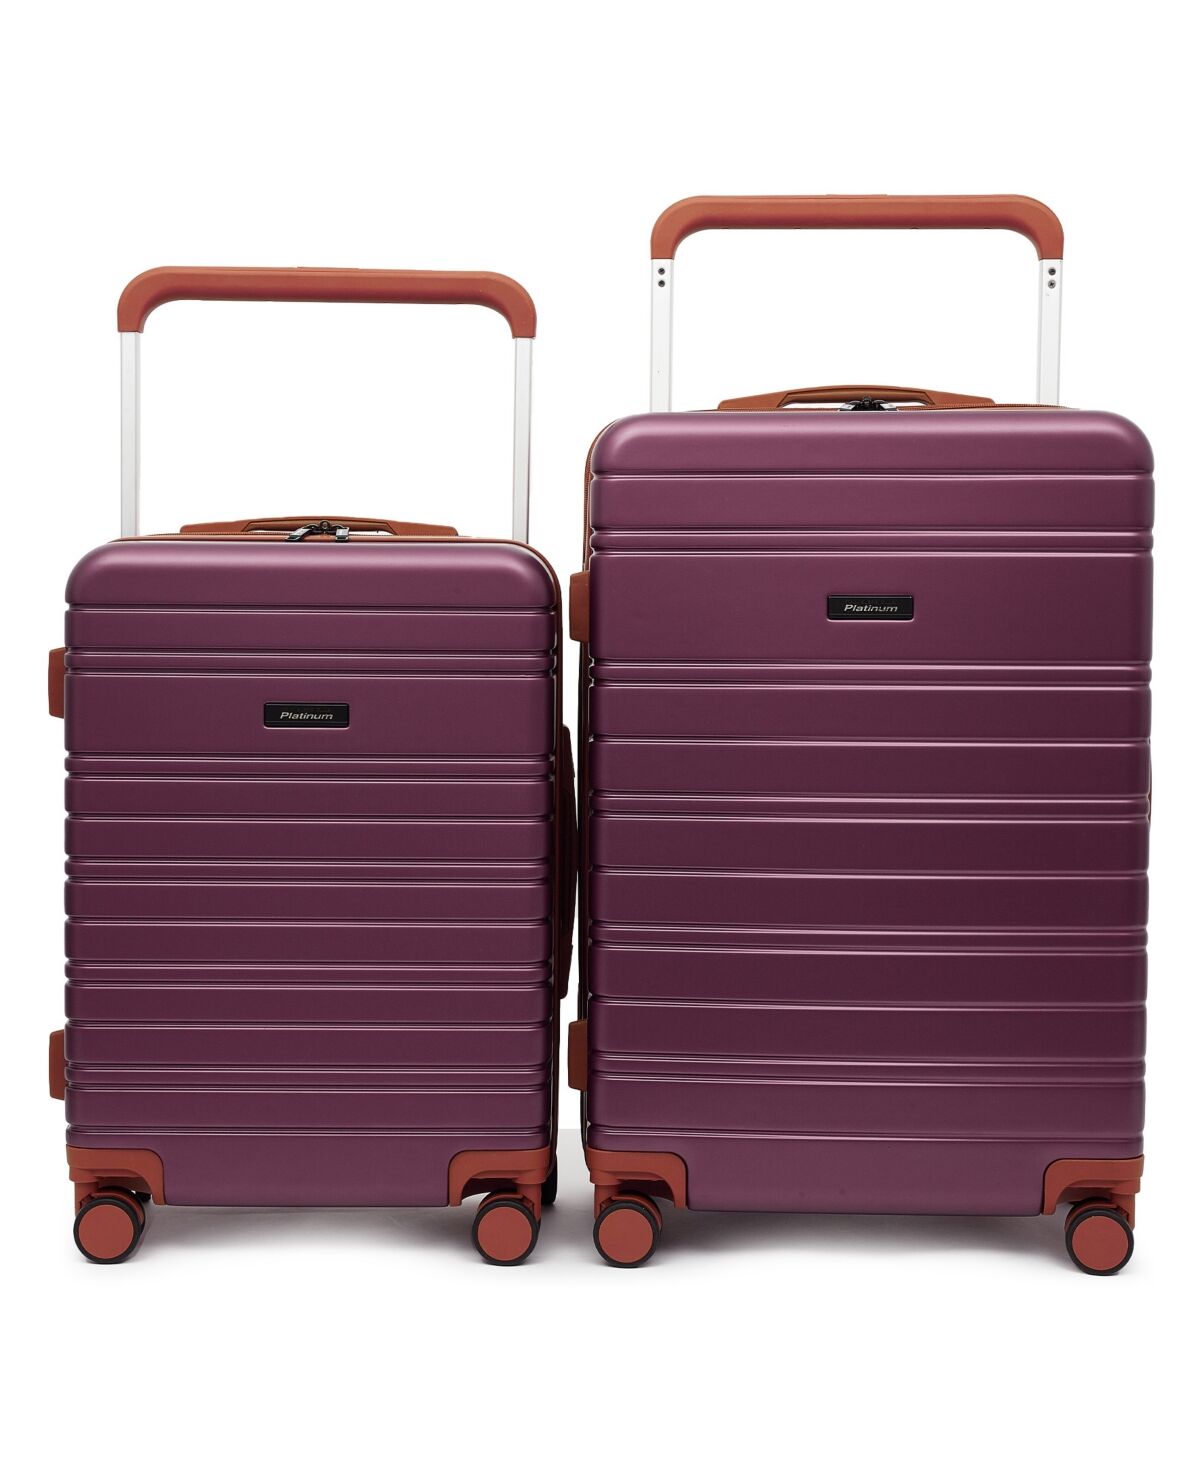 Travelers Club Navigate Collection 2 Piece Rolling Hard Case Luggage Set with X-Tra Wide Telescopic Handle - Burgundy